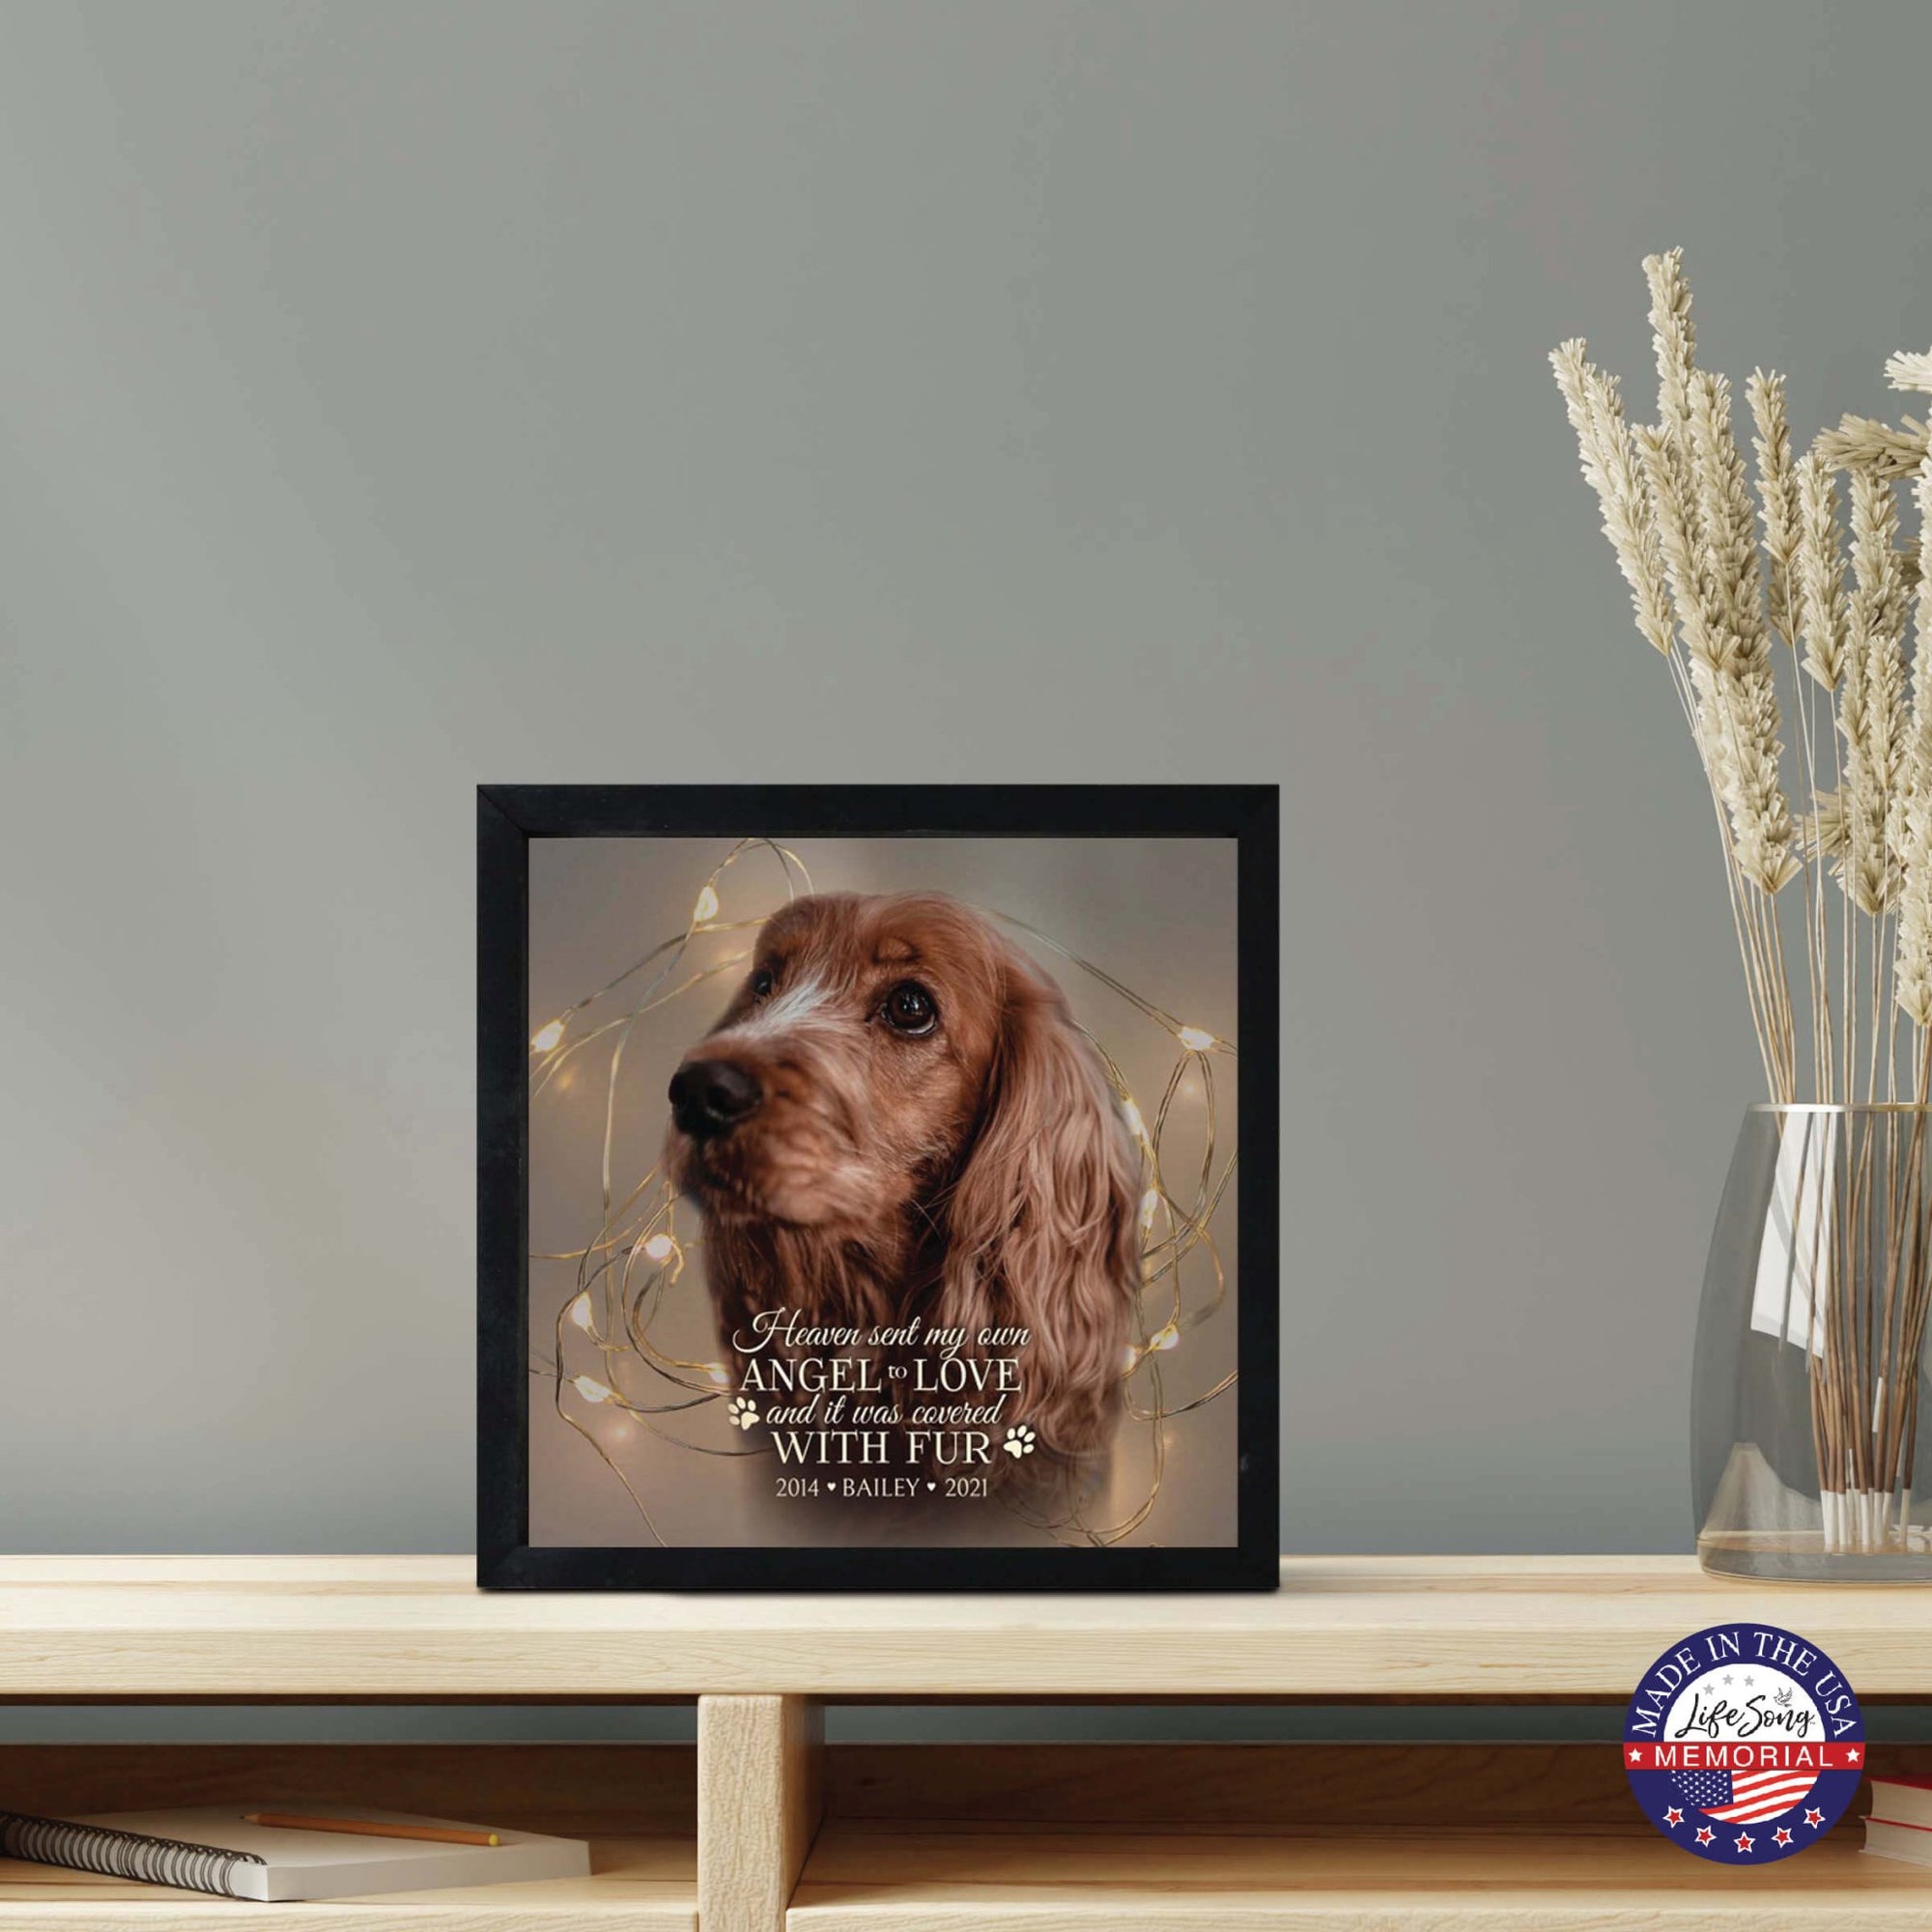 Custom Pet Memorial Framed Shadow Box Wall Décor for the Loss of Beloved Pet - Heaven Sent My Own - LifeSong Milestones